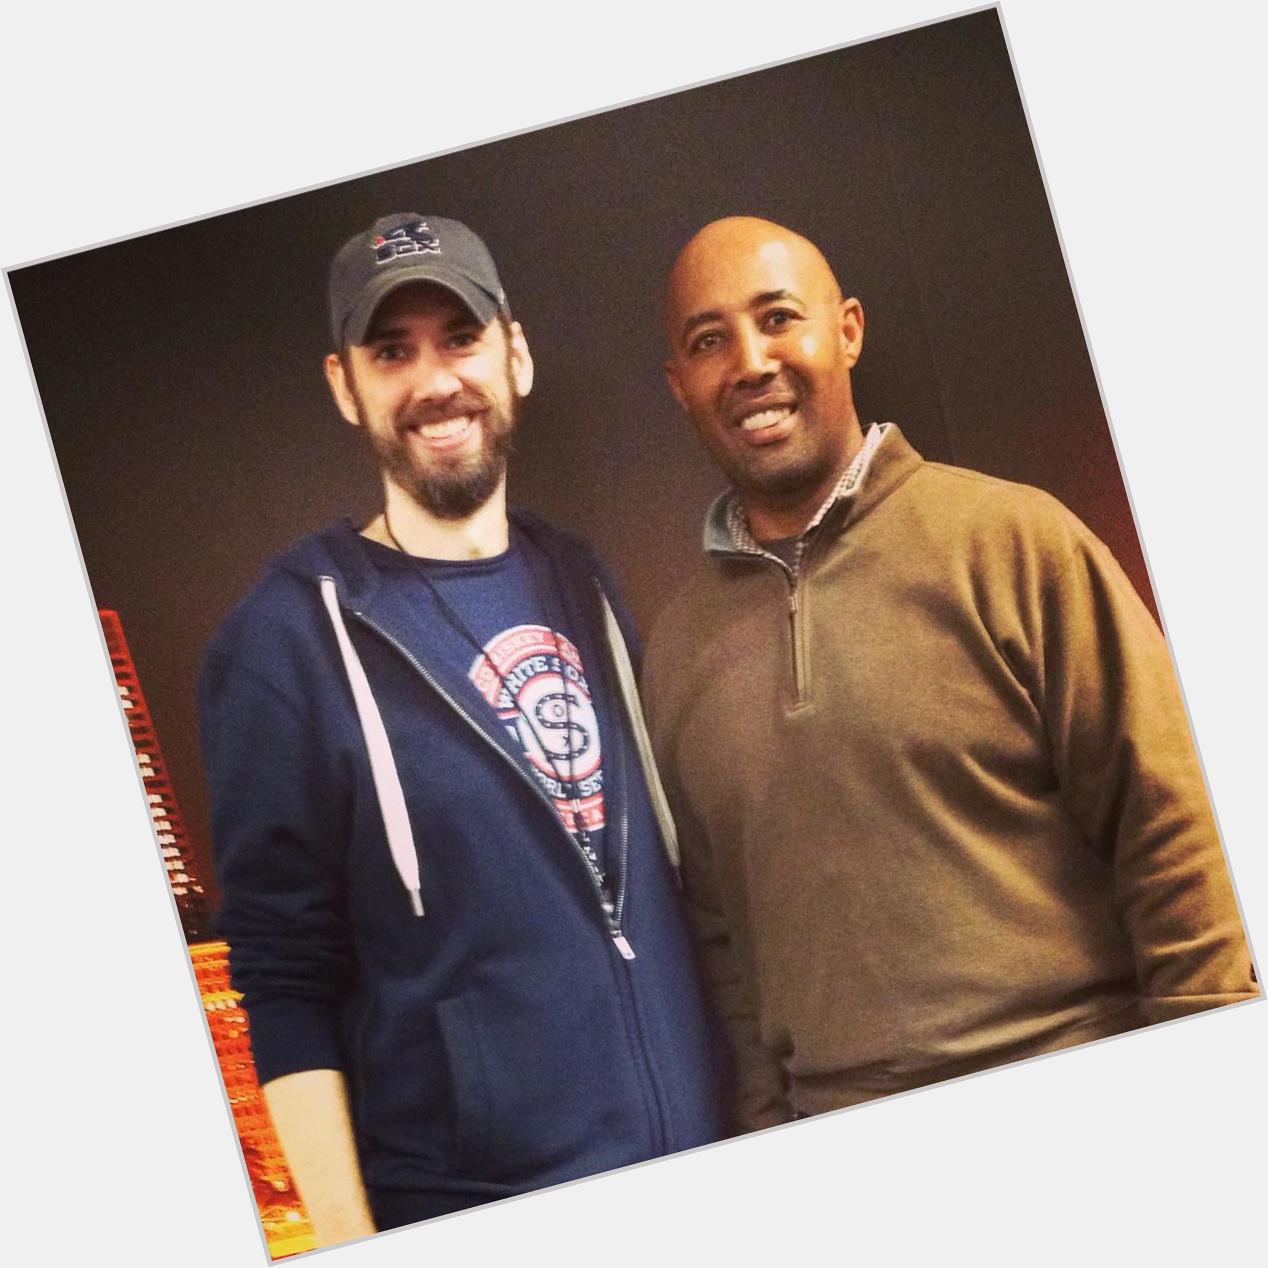 Happy Birthday to one of my all time favorite players: Harold Baines! 